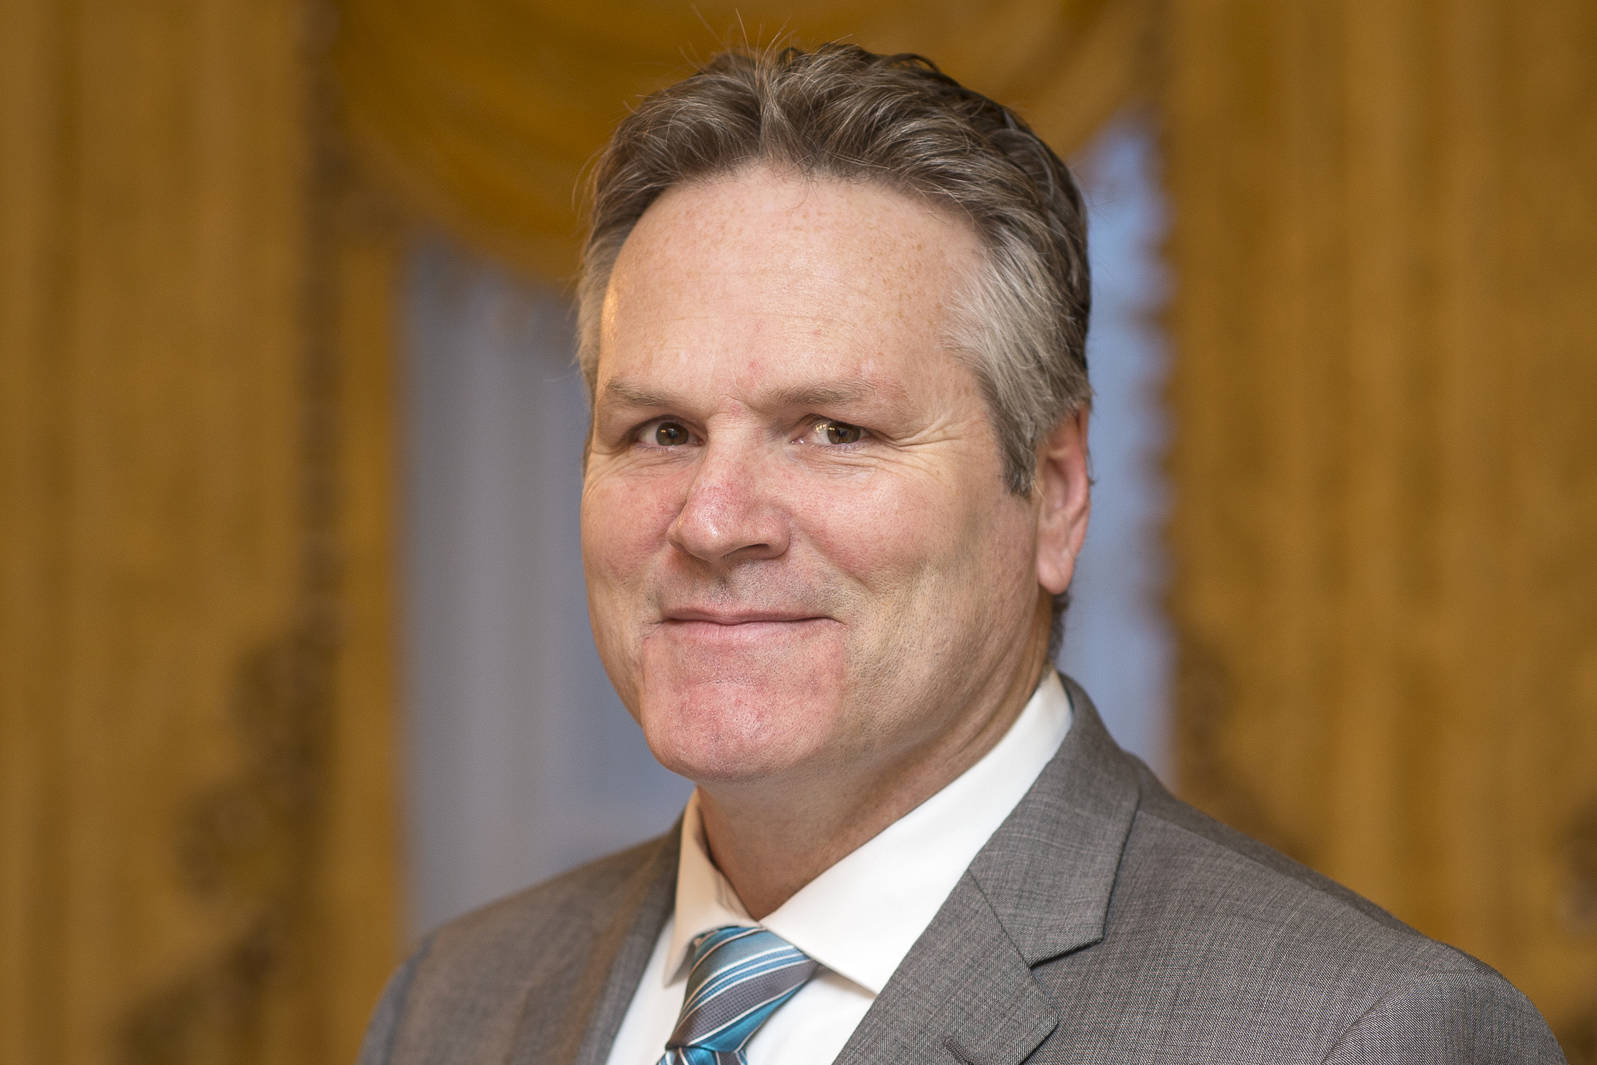 Gov. Mike Dunleavy in the Governor’s Mansion on Dec. 11, 2018. (Michael Penn | Juneau Empire File)